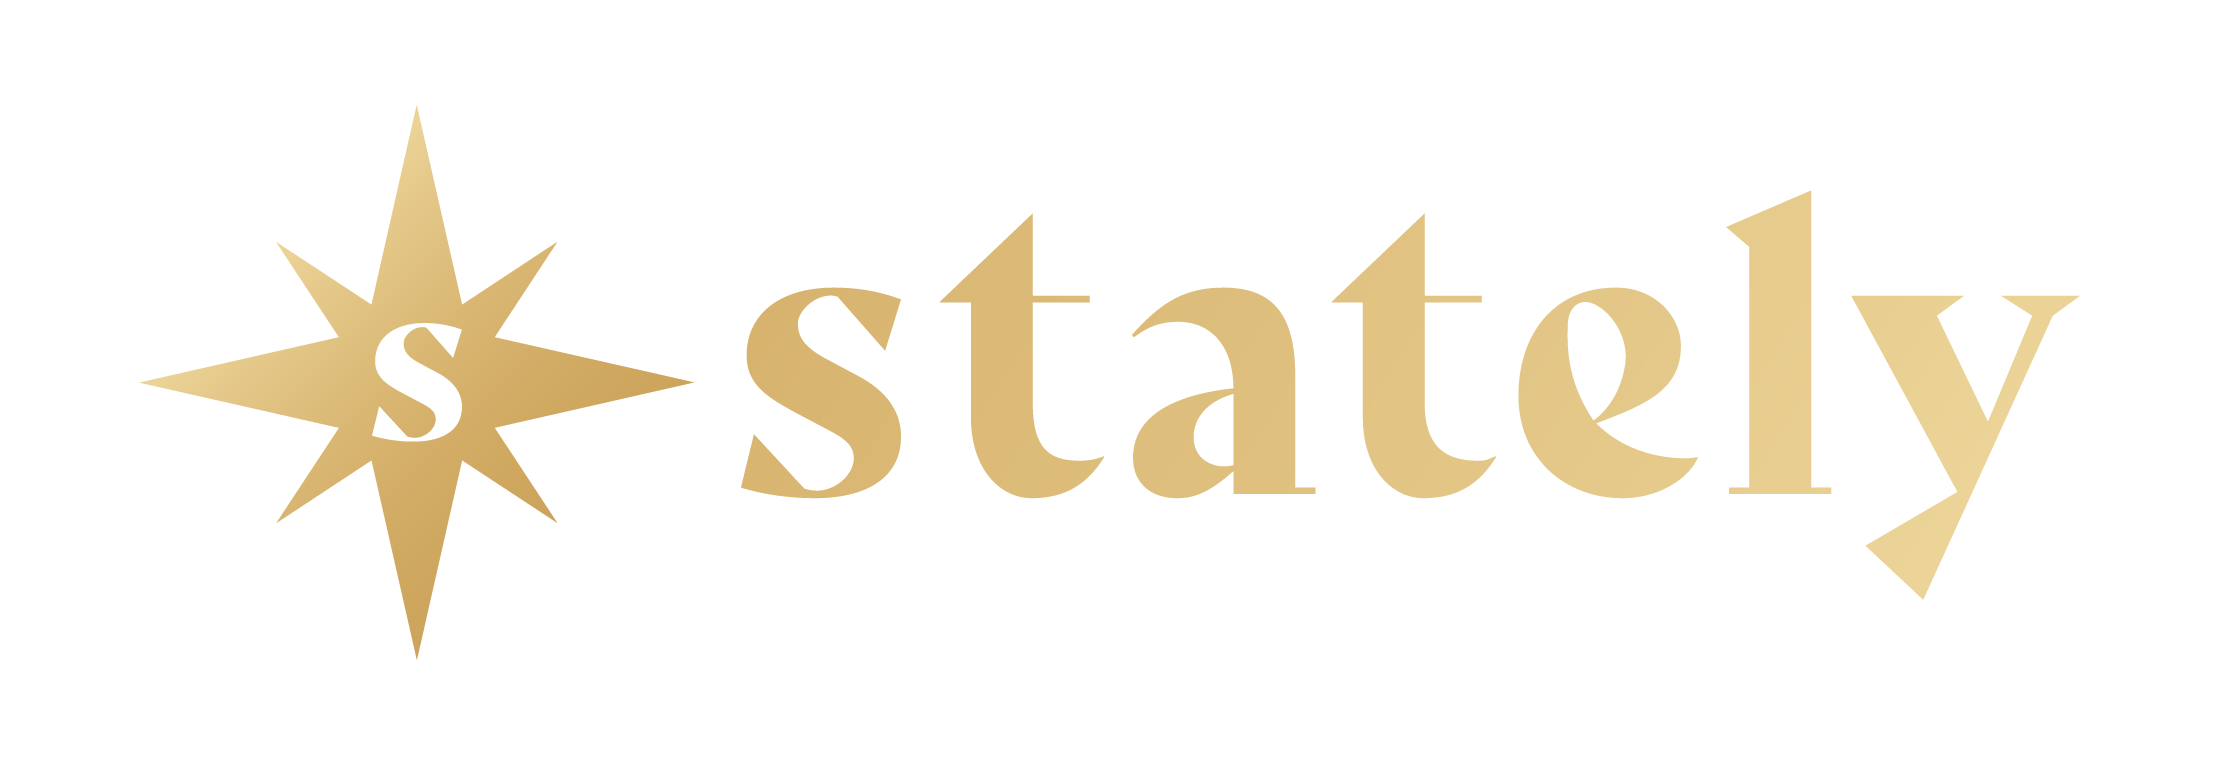 Stately Home Staging Logo